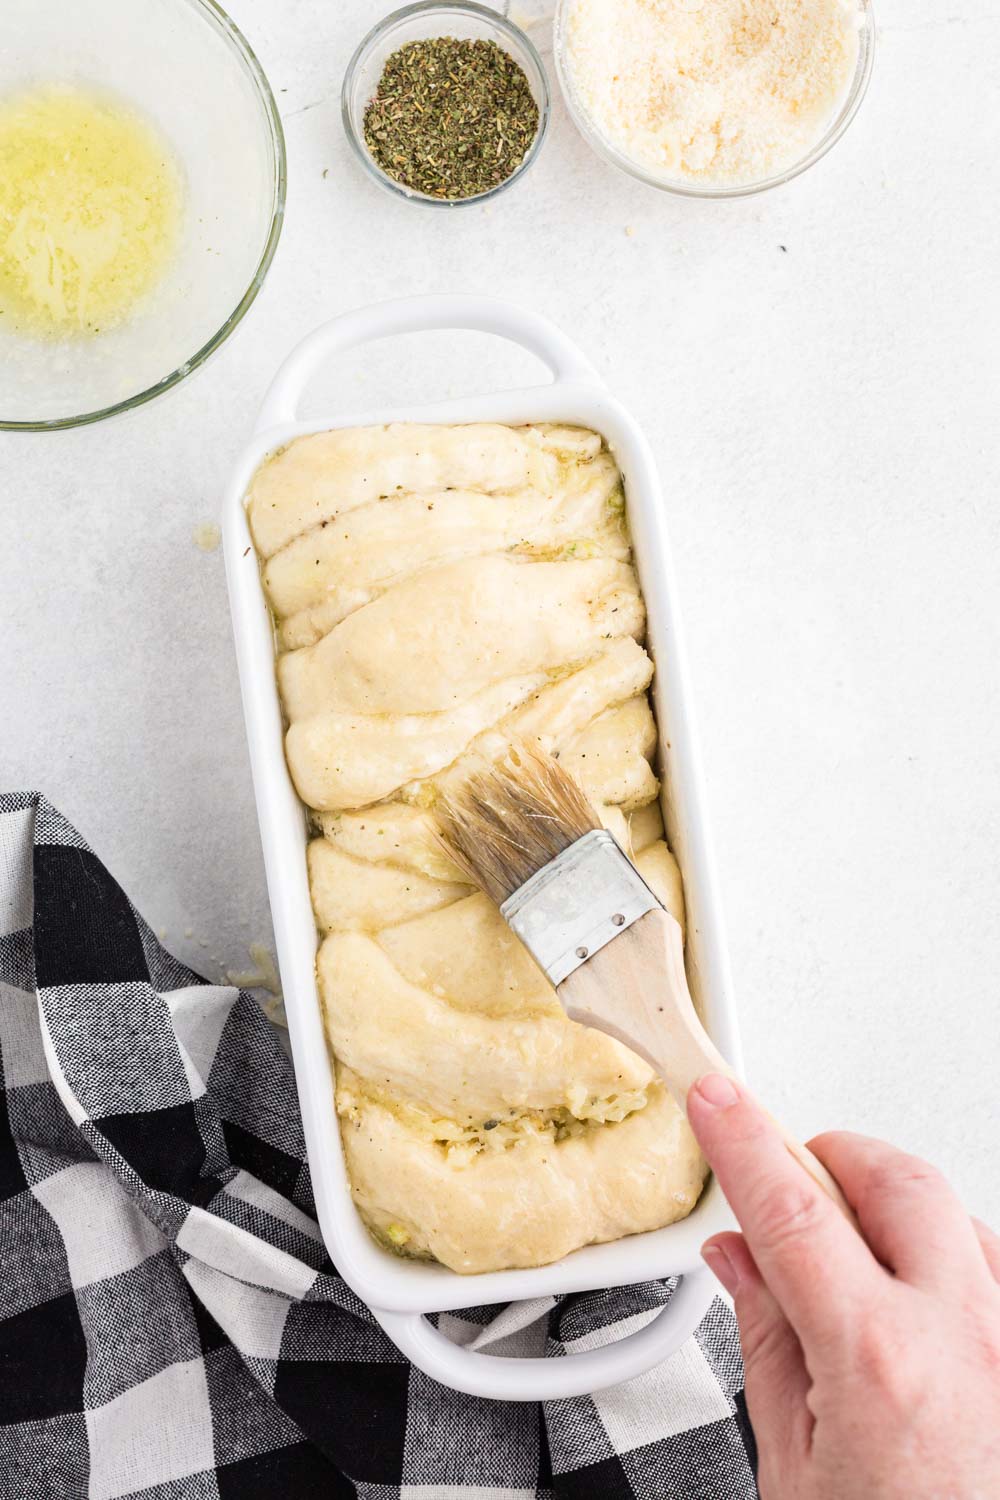 Unbaked pull apart garlic bread in a white loaf baking dish being brushed with melted butter, bowl of melted butter, bowl of seasoning, bowl of grated cheese, black and white checkered linen, on a white marble countertop.